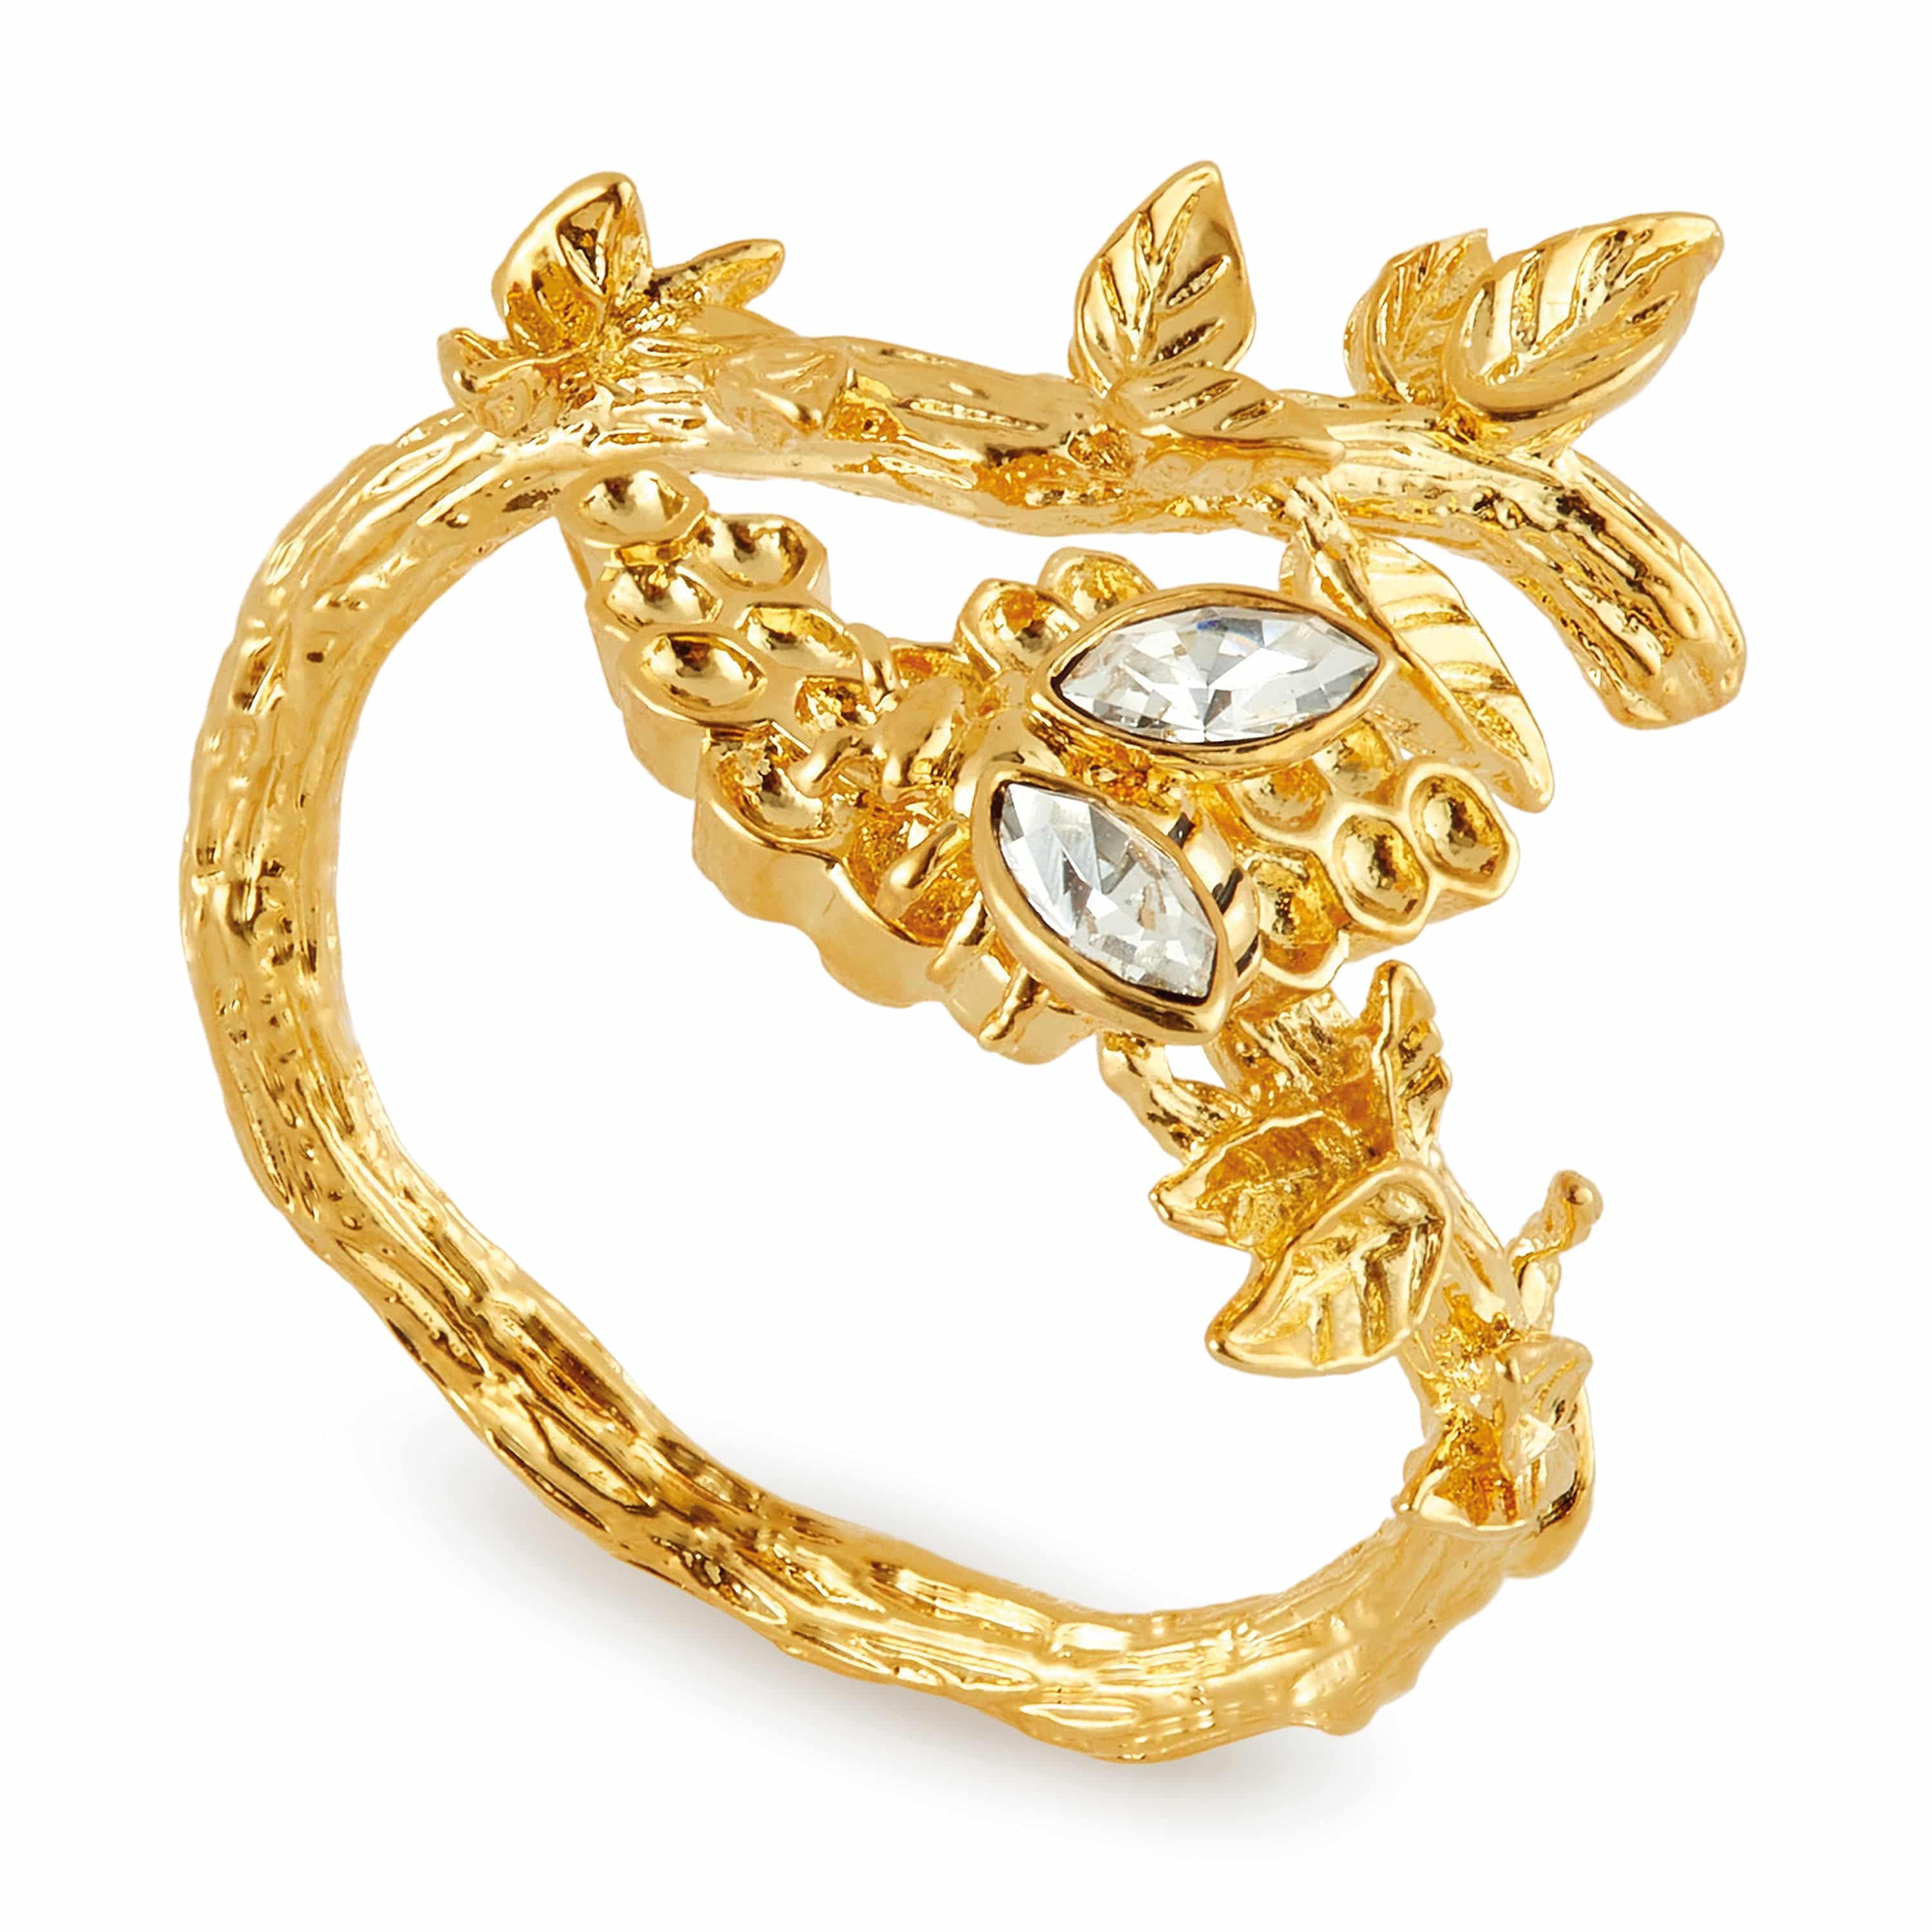 Golden Honeycomb Ring - The Gilded Witch